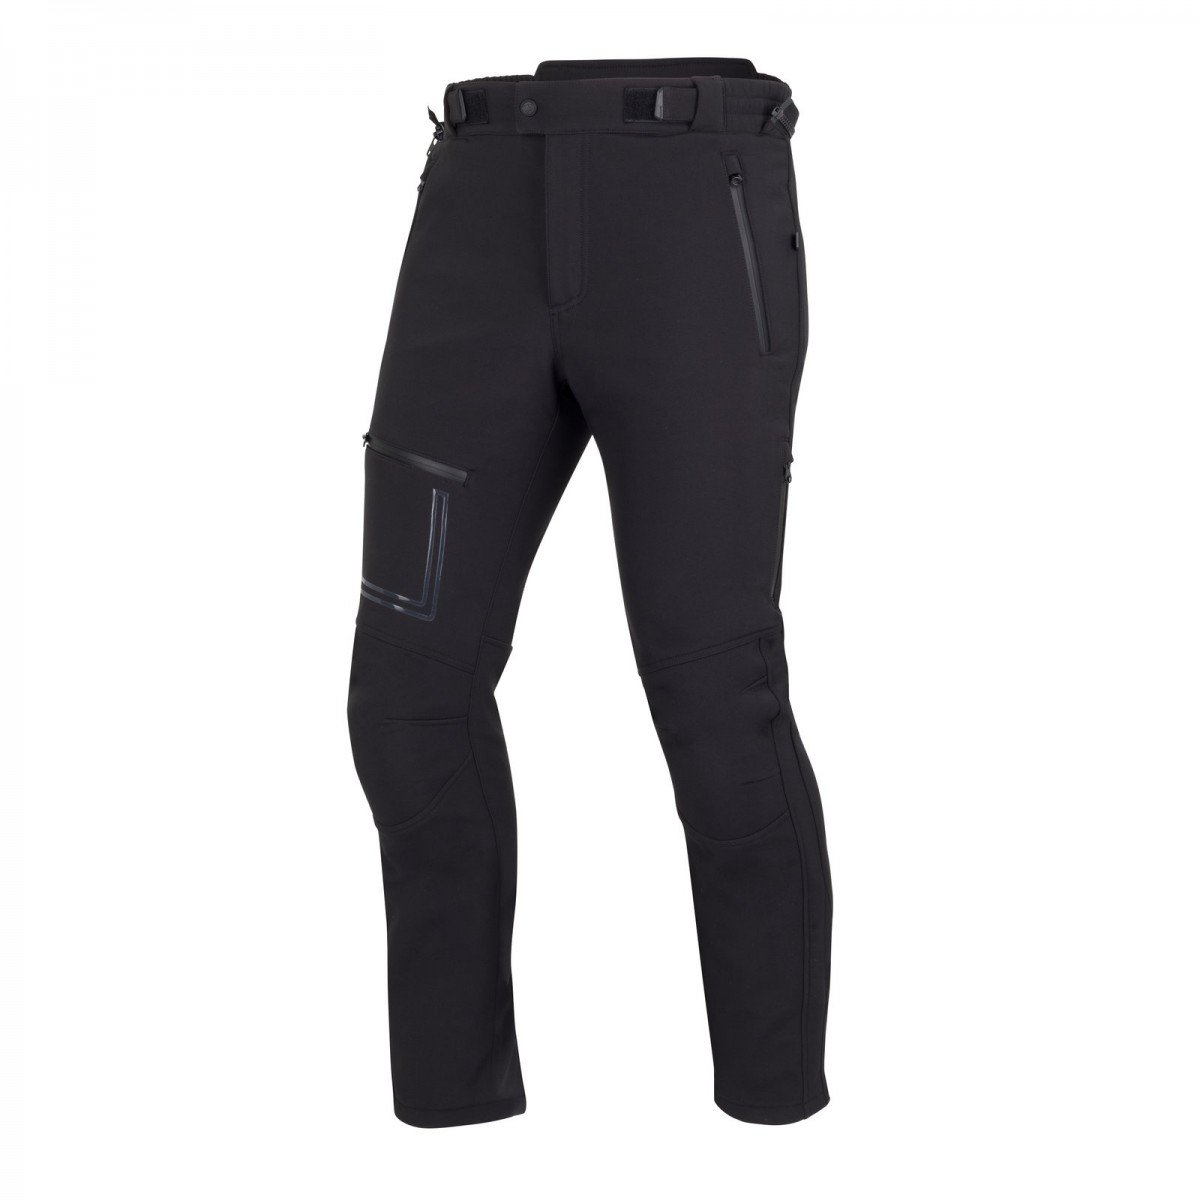 Image of Bering Alkor Trousers Black Size M ID 3660815150764